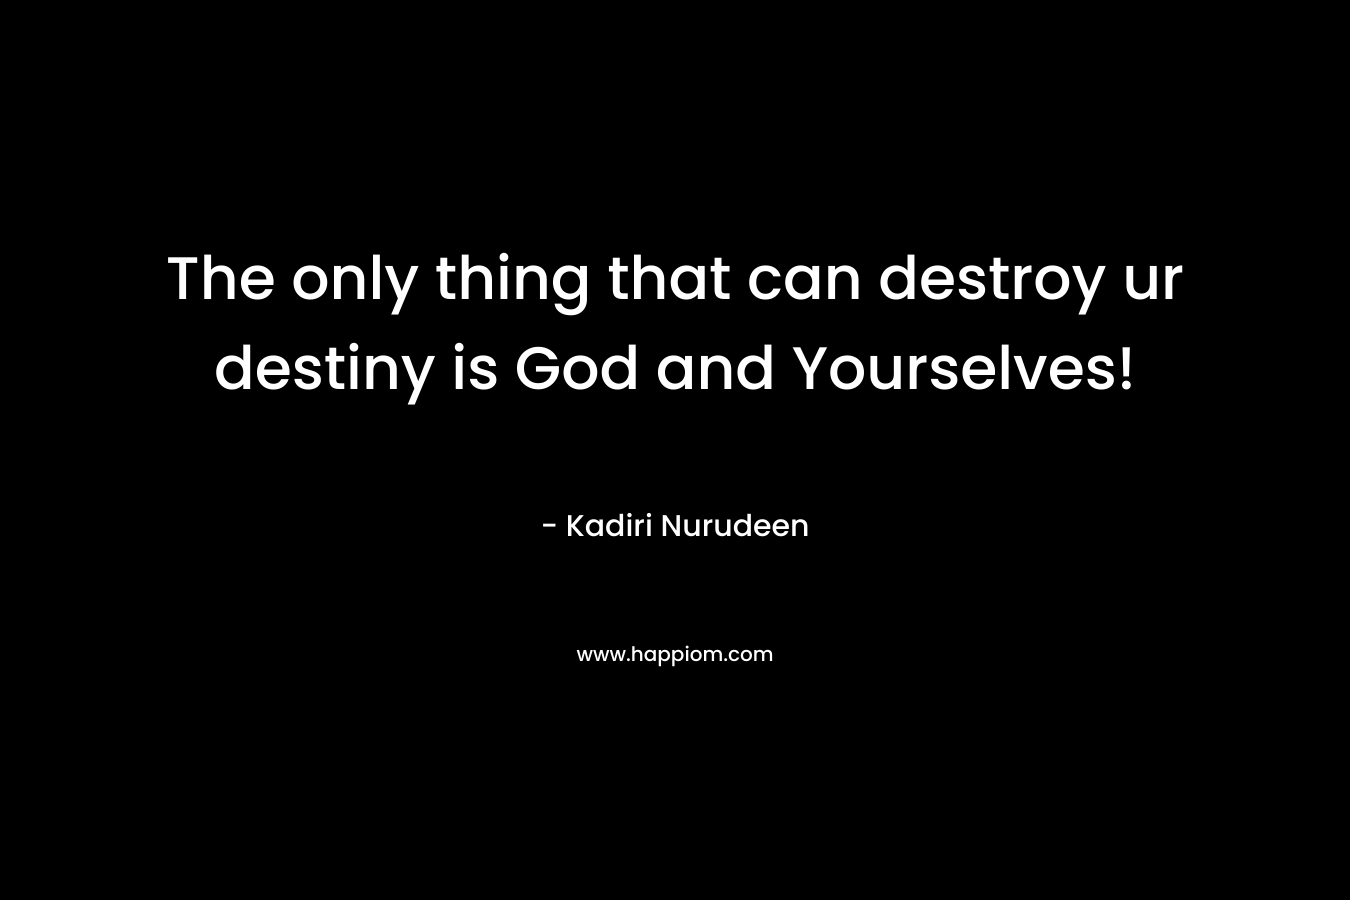 The only thing that can destroy ur destiny is God and Yourselves! – Kadiri Nurudeen